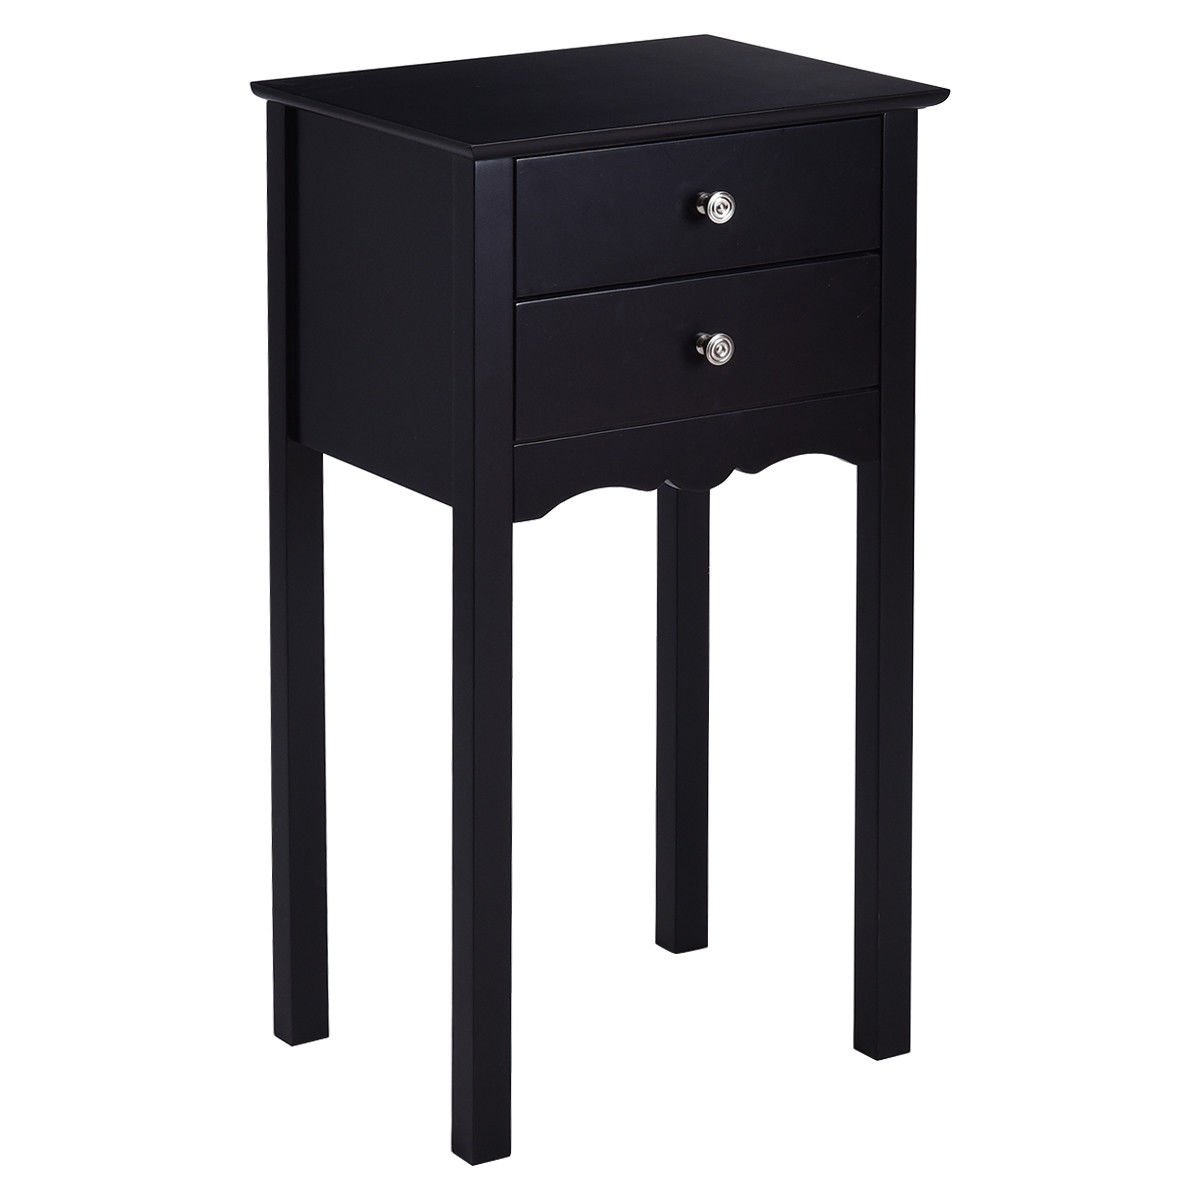 giantex end table drawers side nightstand white accent tables living room multi purpose bedroom home furniture black kitchen dining perspex cube high corner wicker couch glass top